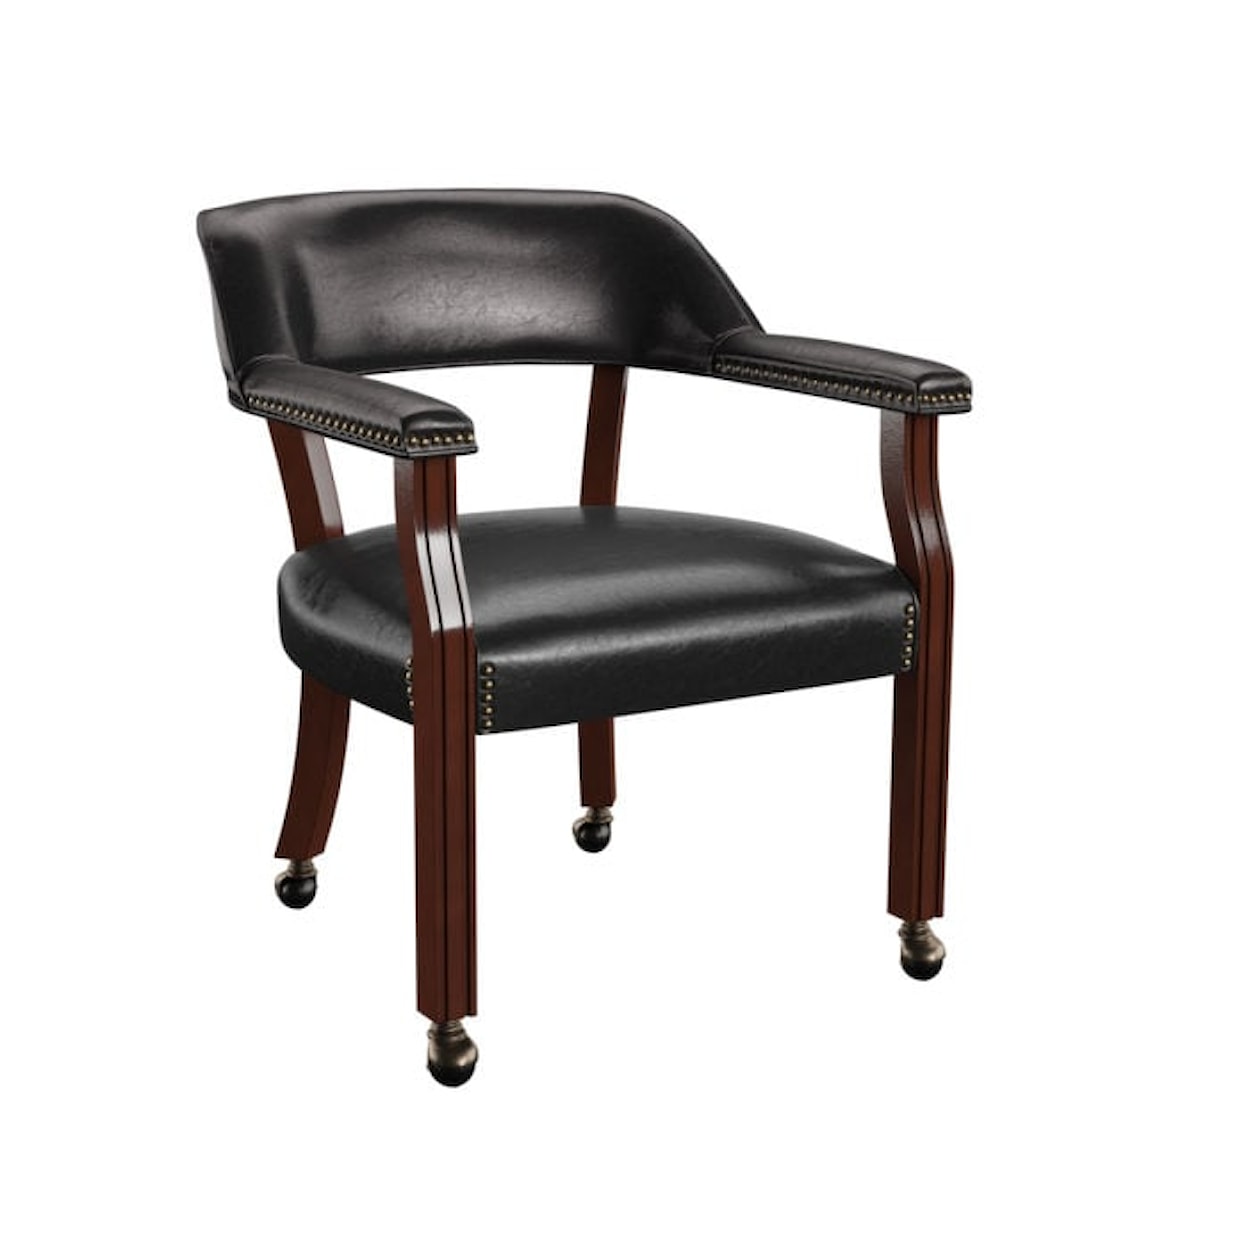 Steve Silver Tournament Tournament Arm Chair with Casters